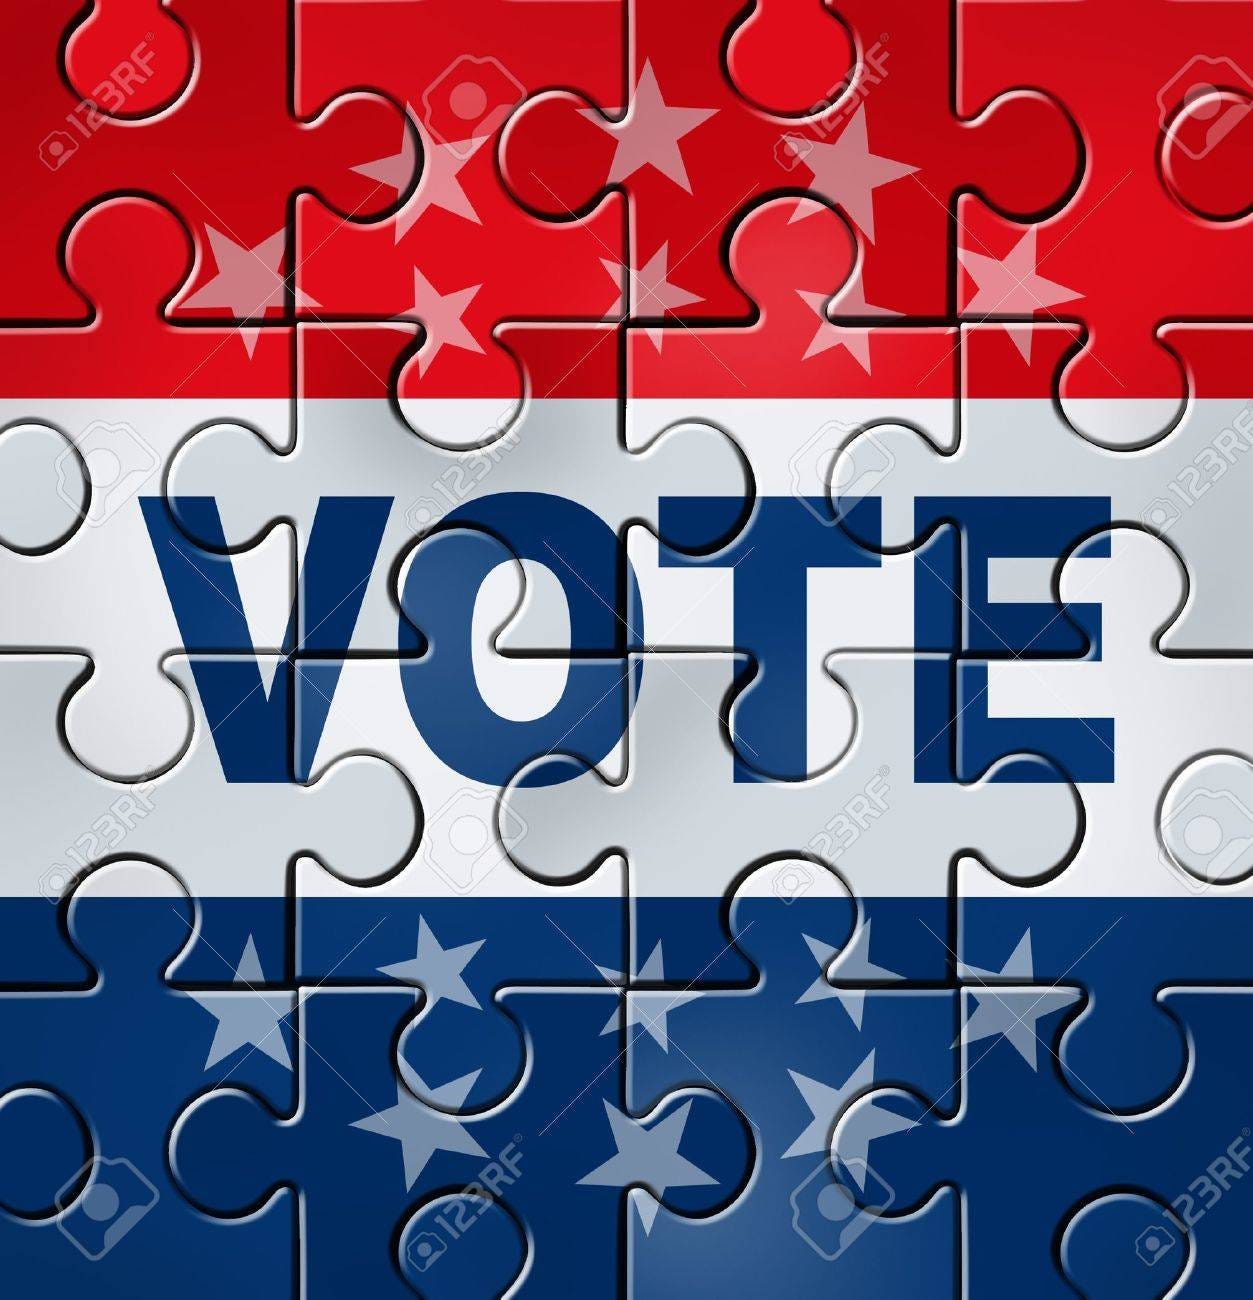 Vote In A Political Campaign Concept With A Graphic Element Icon Of Voting  As A Jigsaw